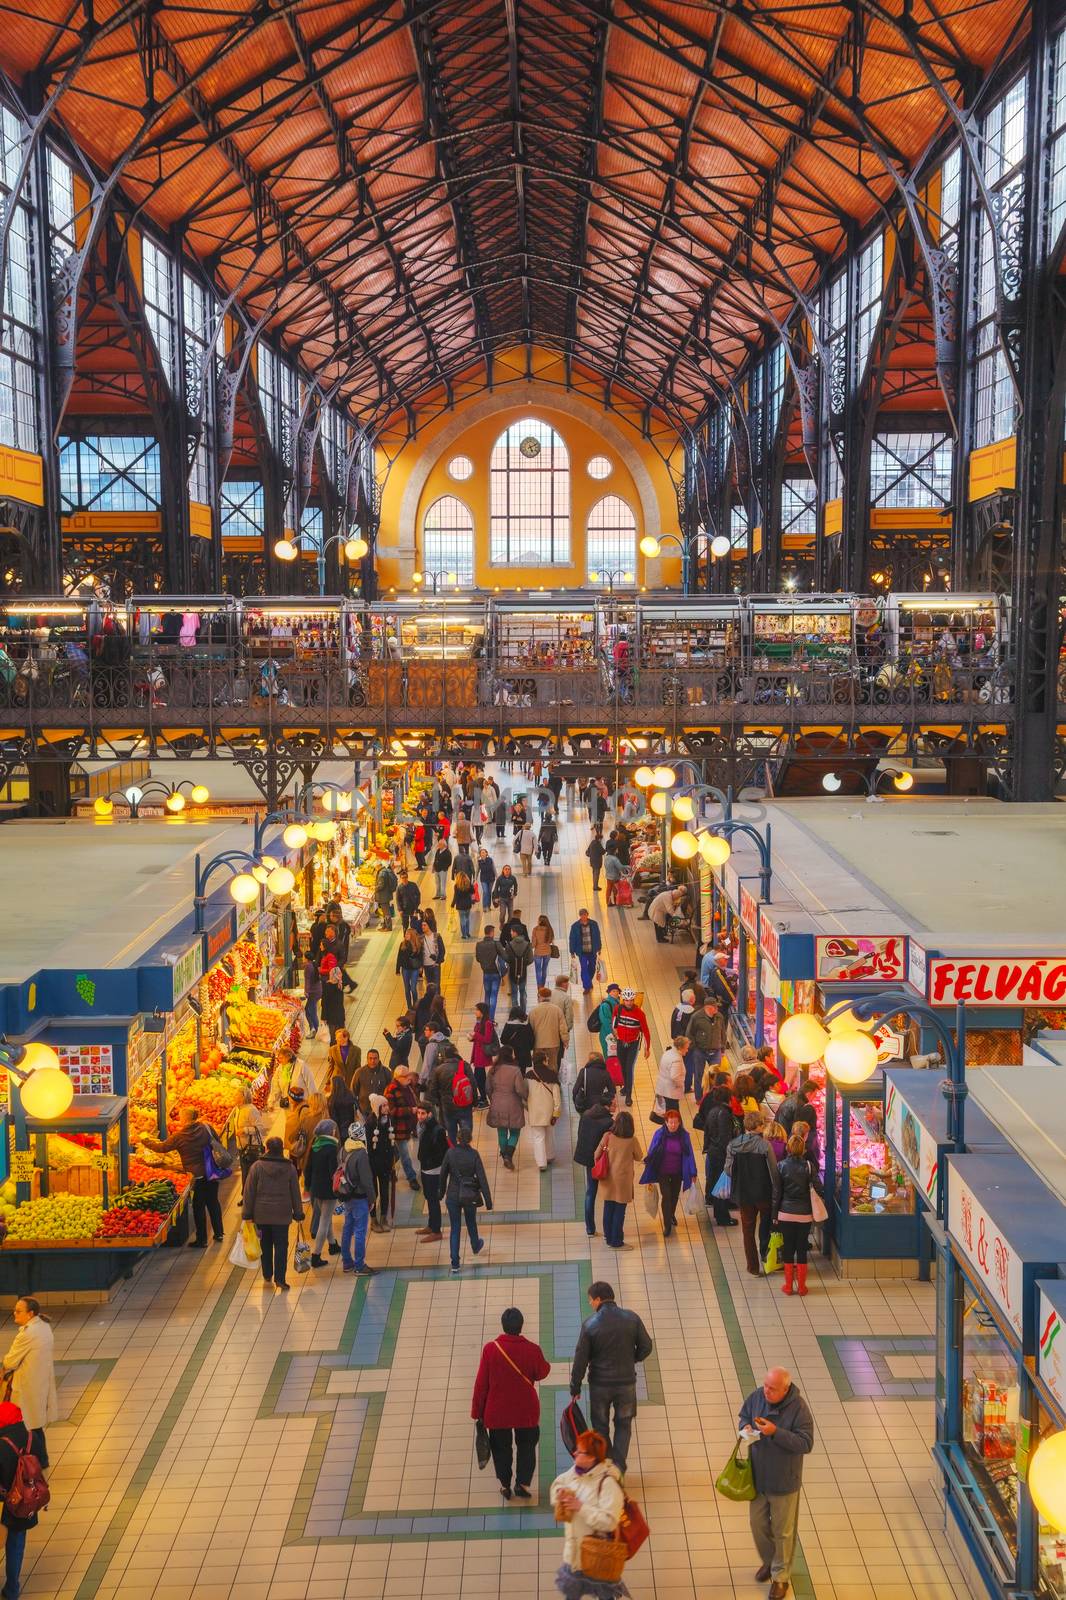 BUDAPEST - OCTOBER 22: The Great Market Hall in Budapest on October 22, 2014 in Budapest, Hungary. It's the largest and oldest indoor market in Budapest.